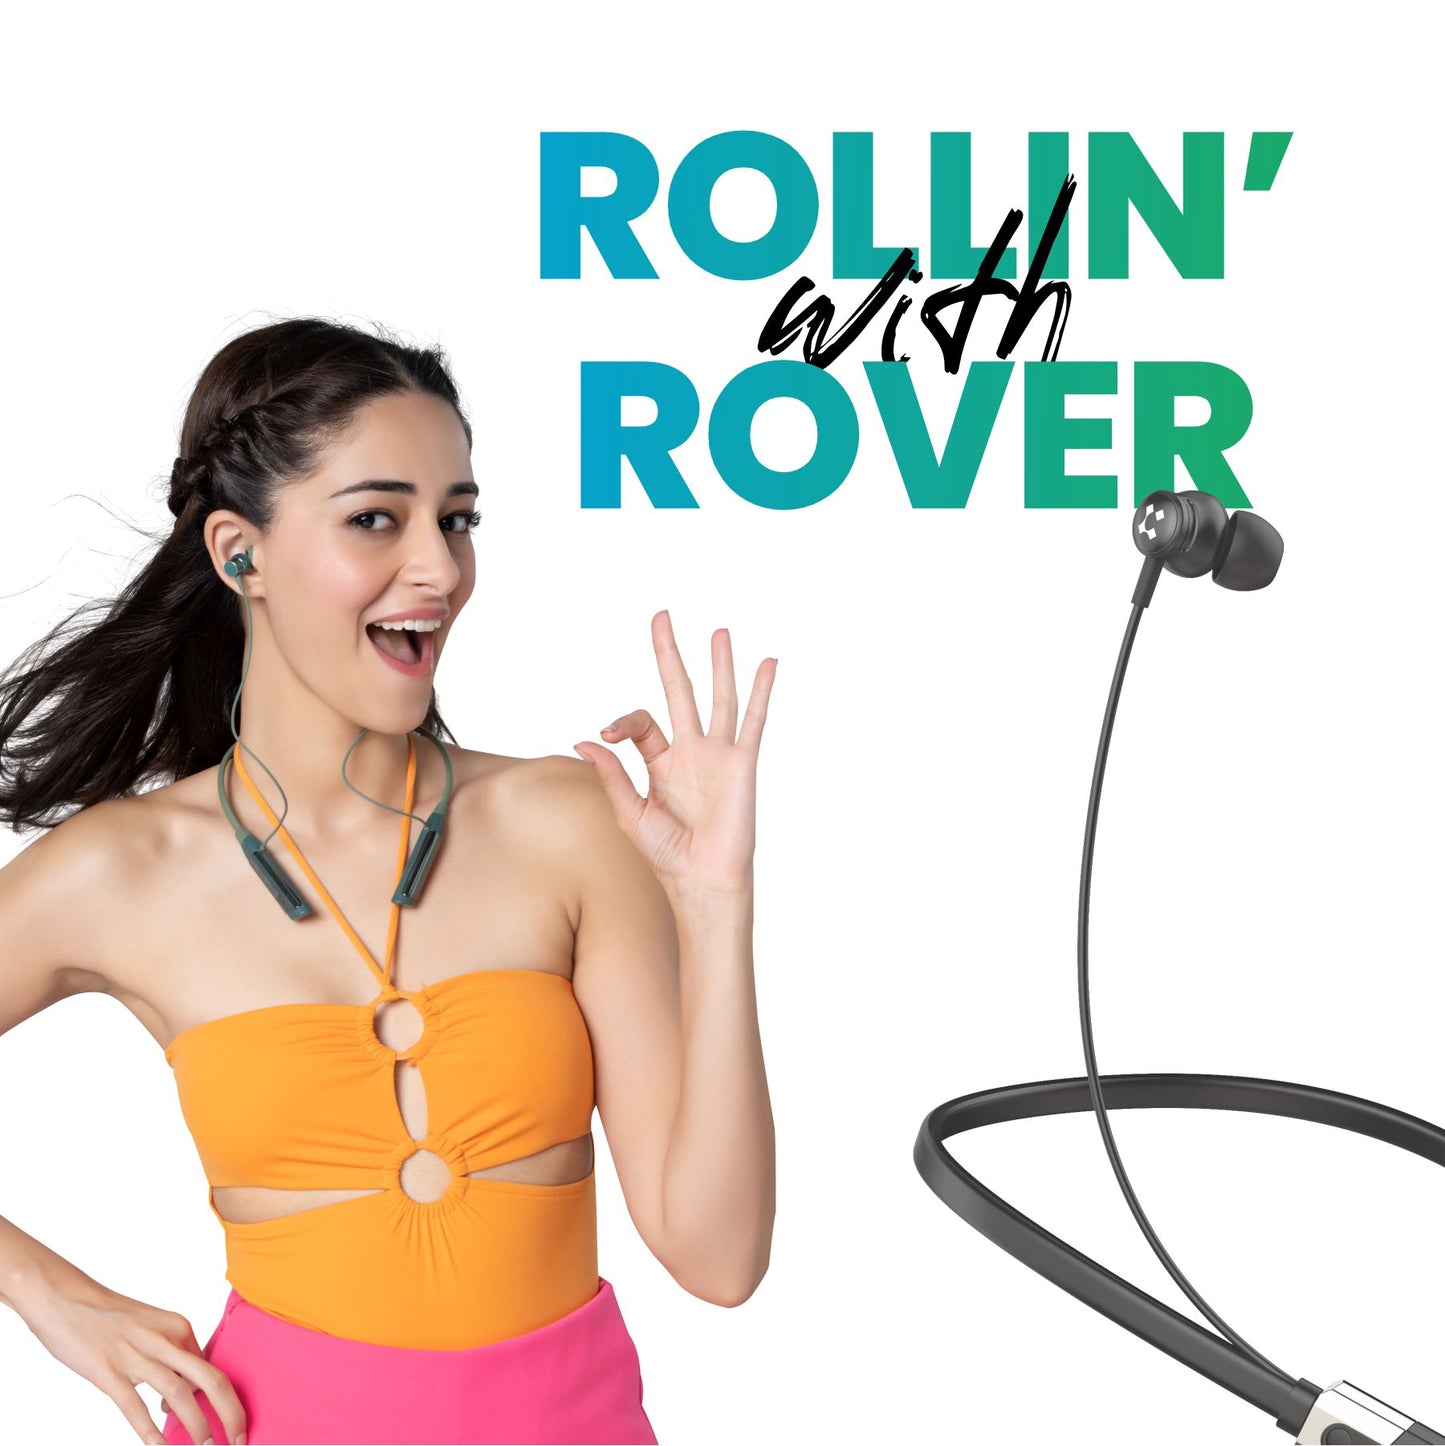 LYNE Rover 3 36 Hours Music Time Bluetooth Neckband with Dual Pairing Feature, Magnetic Earbuds & Mic